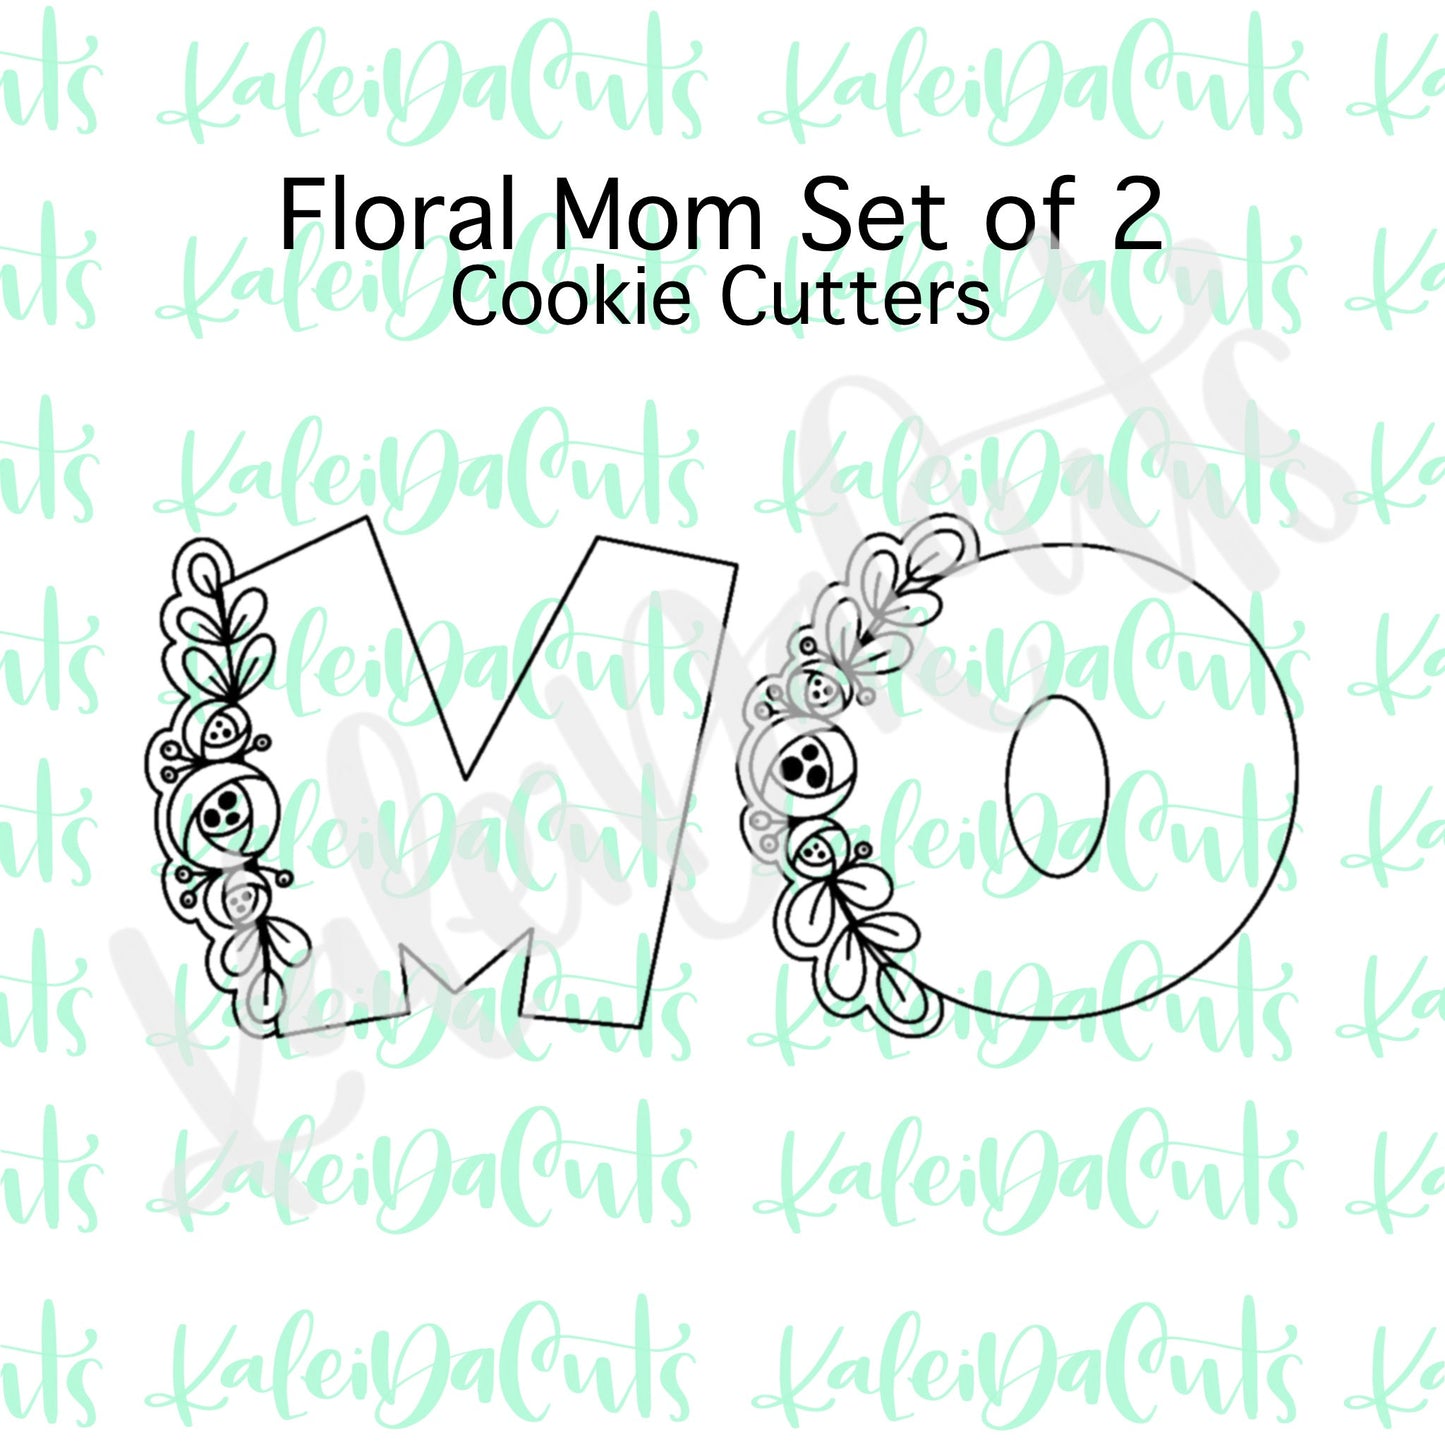 Floral Mom Cookie Cutter Set of 2